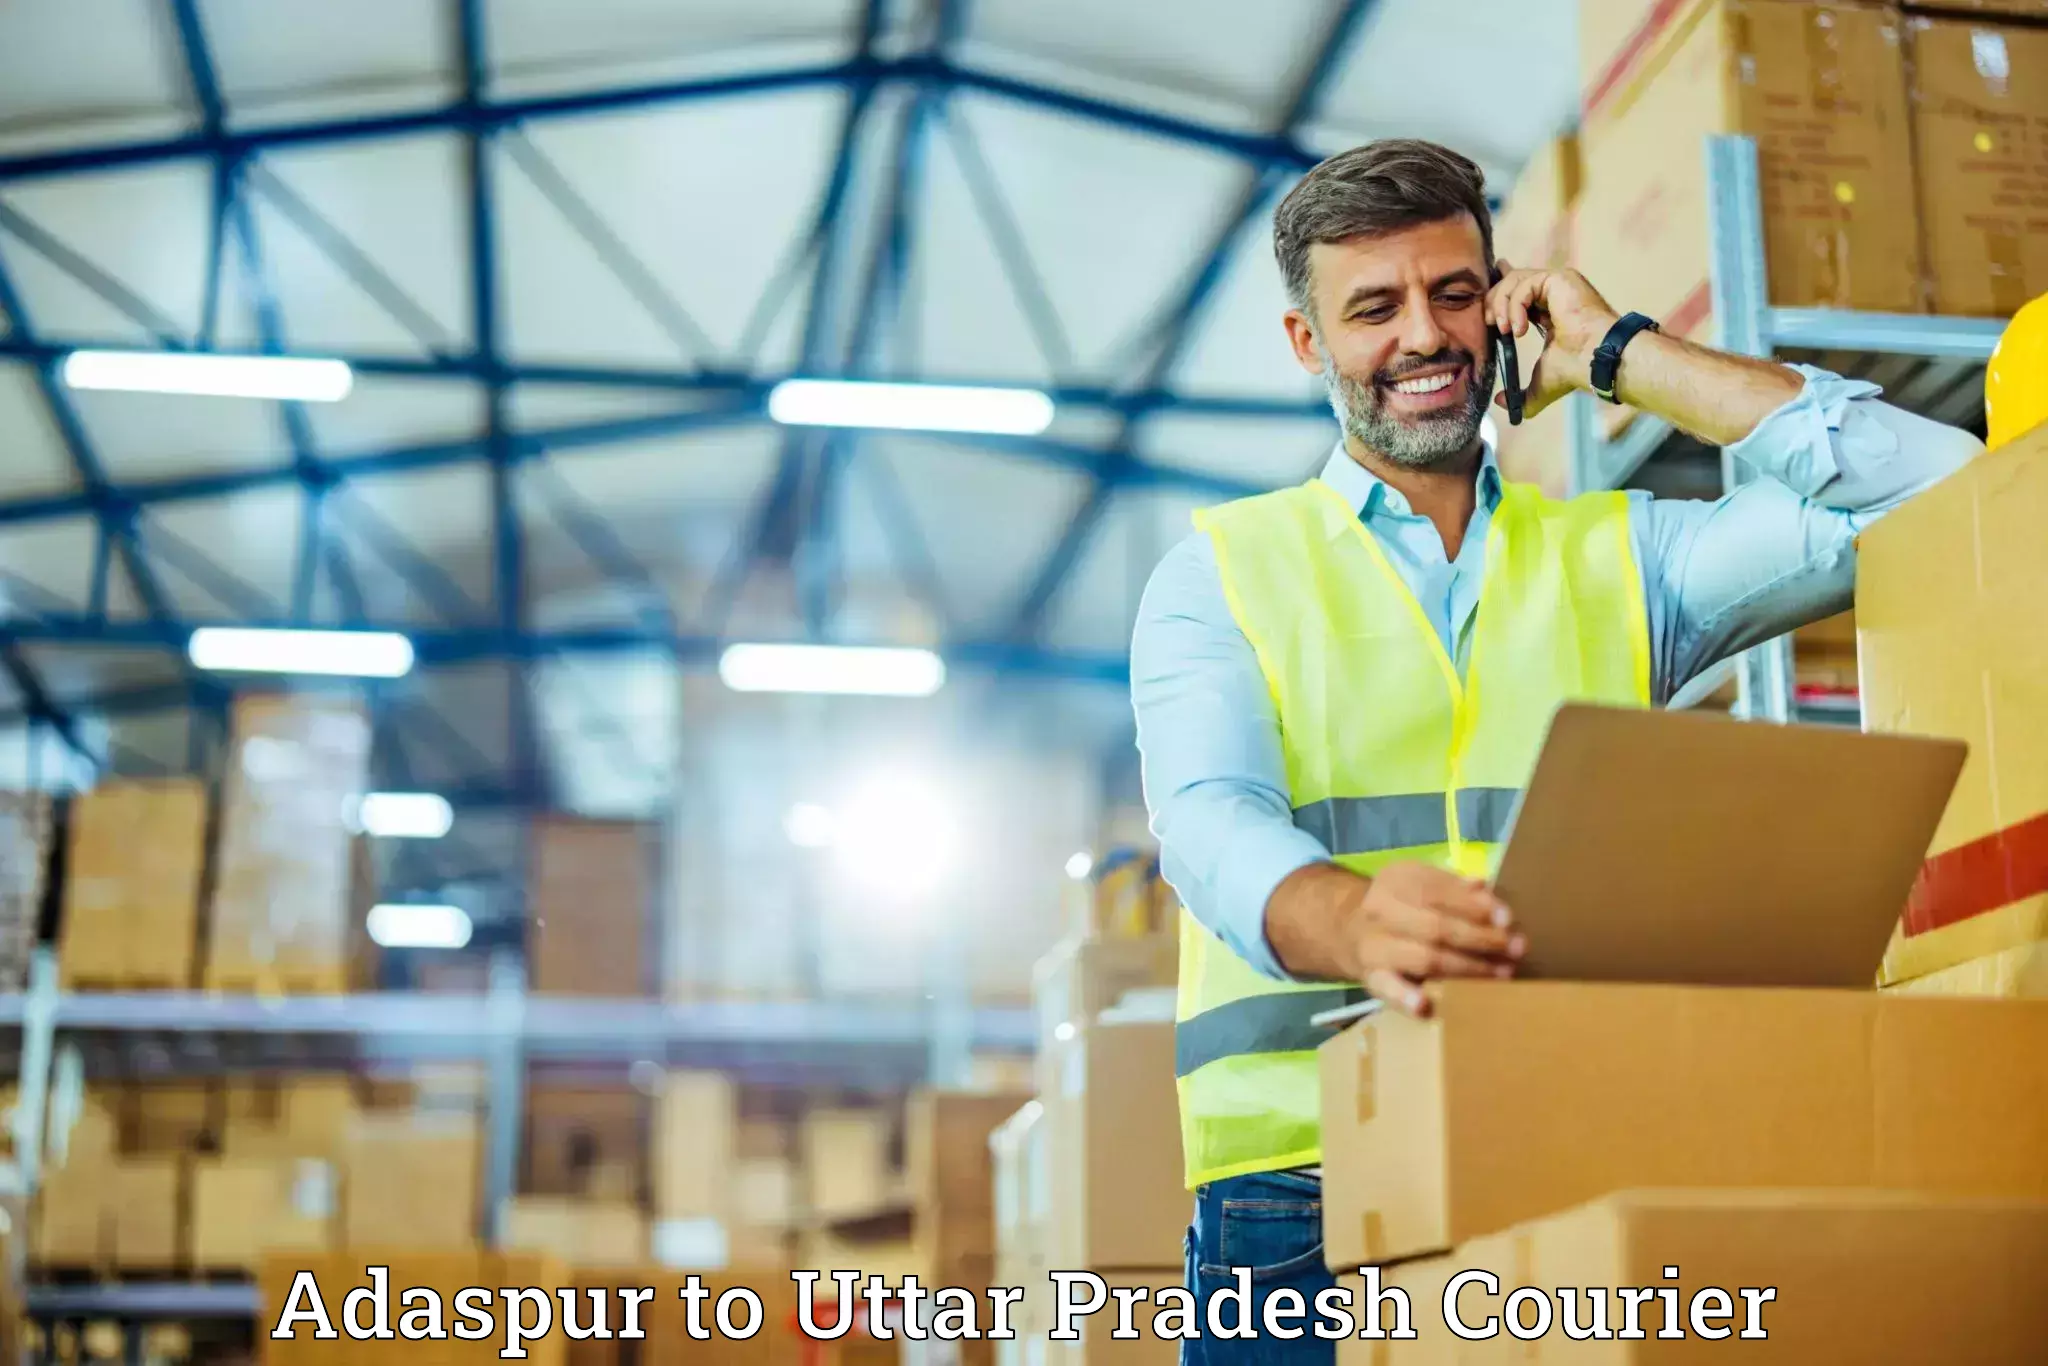 Efficient moving company Adaspur to Kanpur